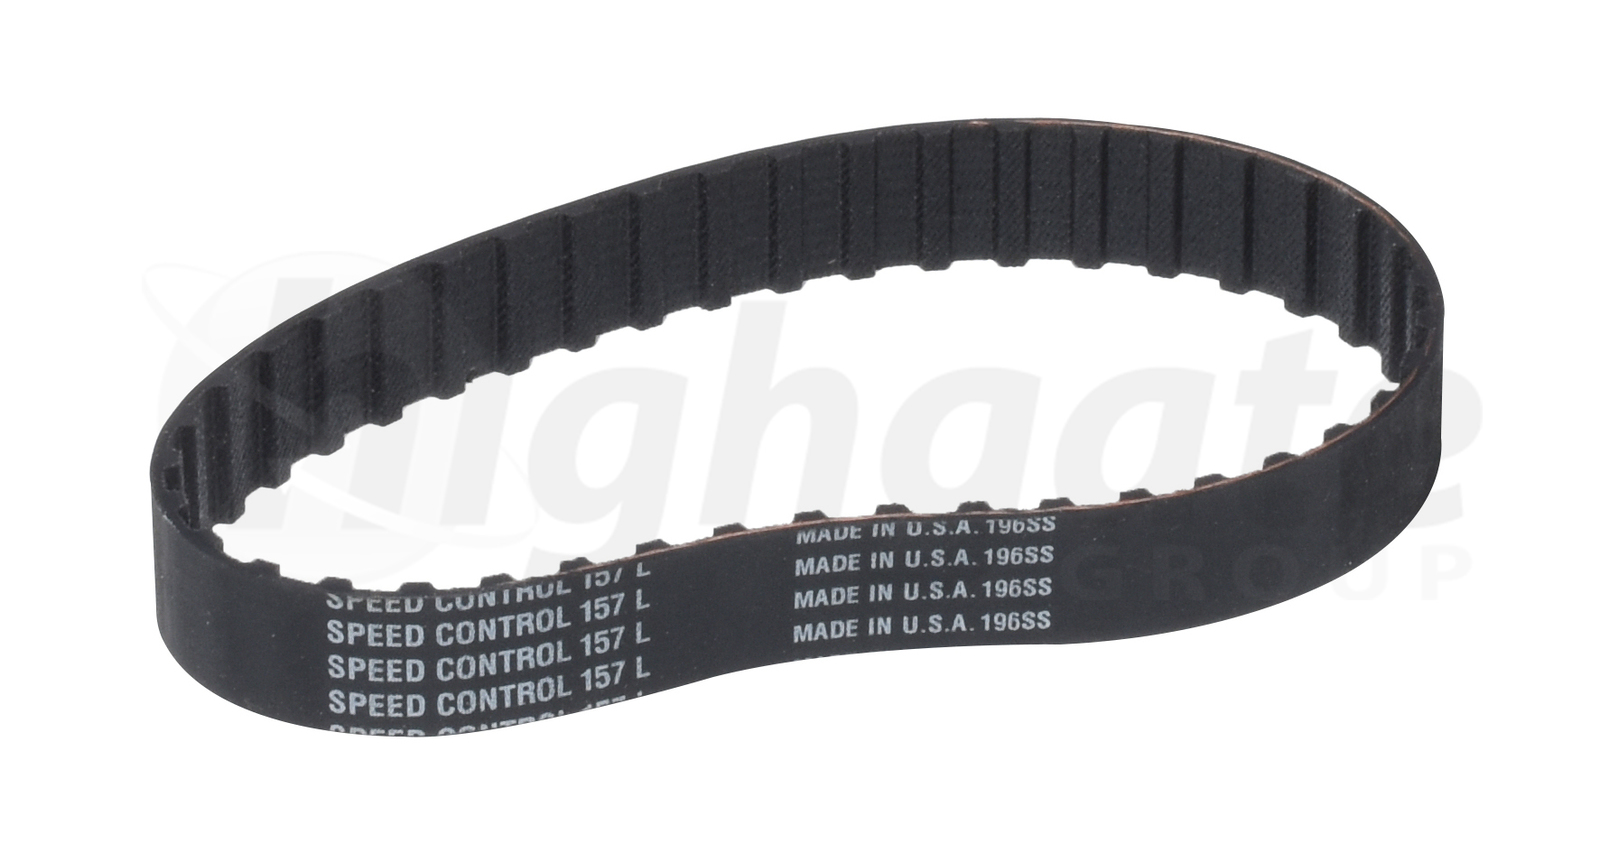 Cozzini HE2 Drive Belt 3/4 Inch Wide (For models 2009 and later)